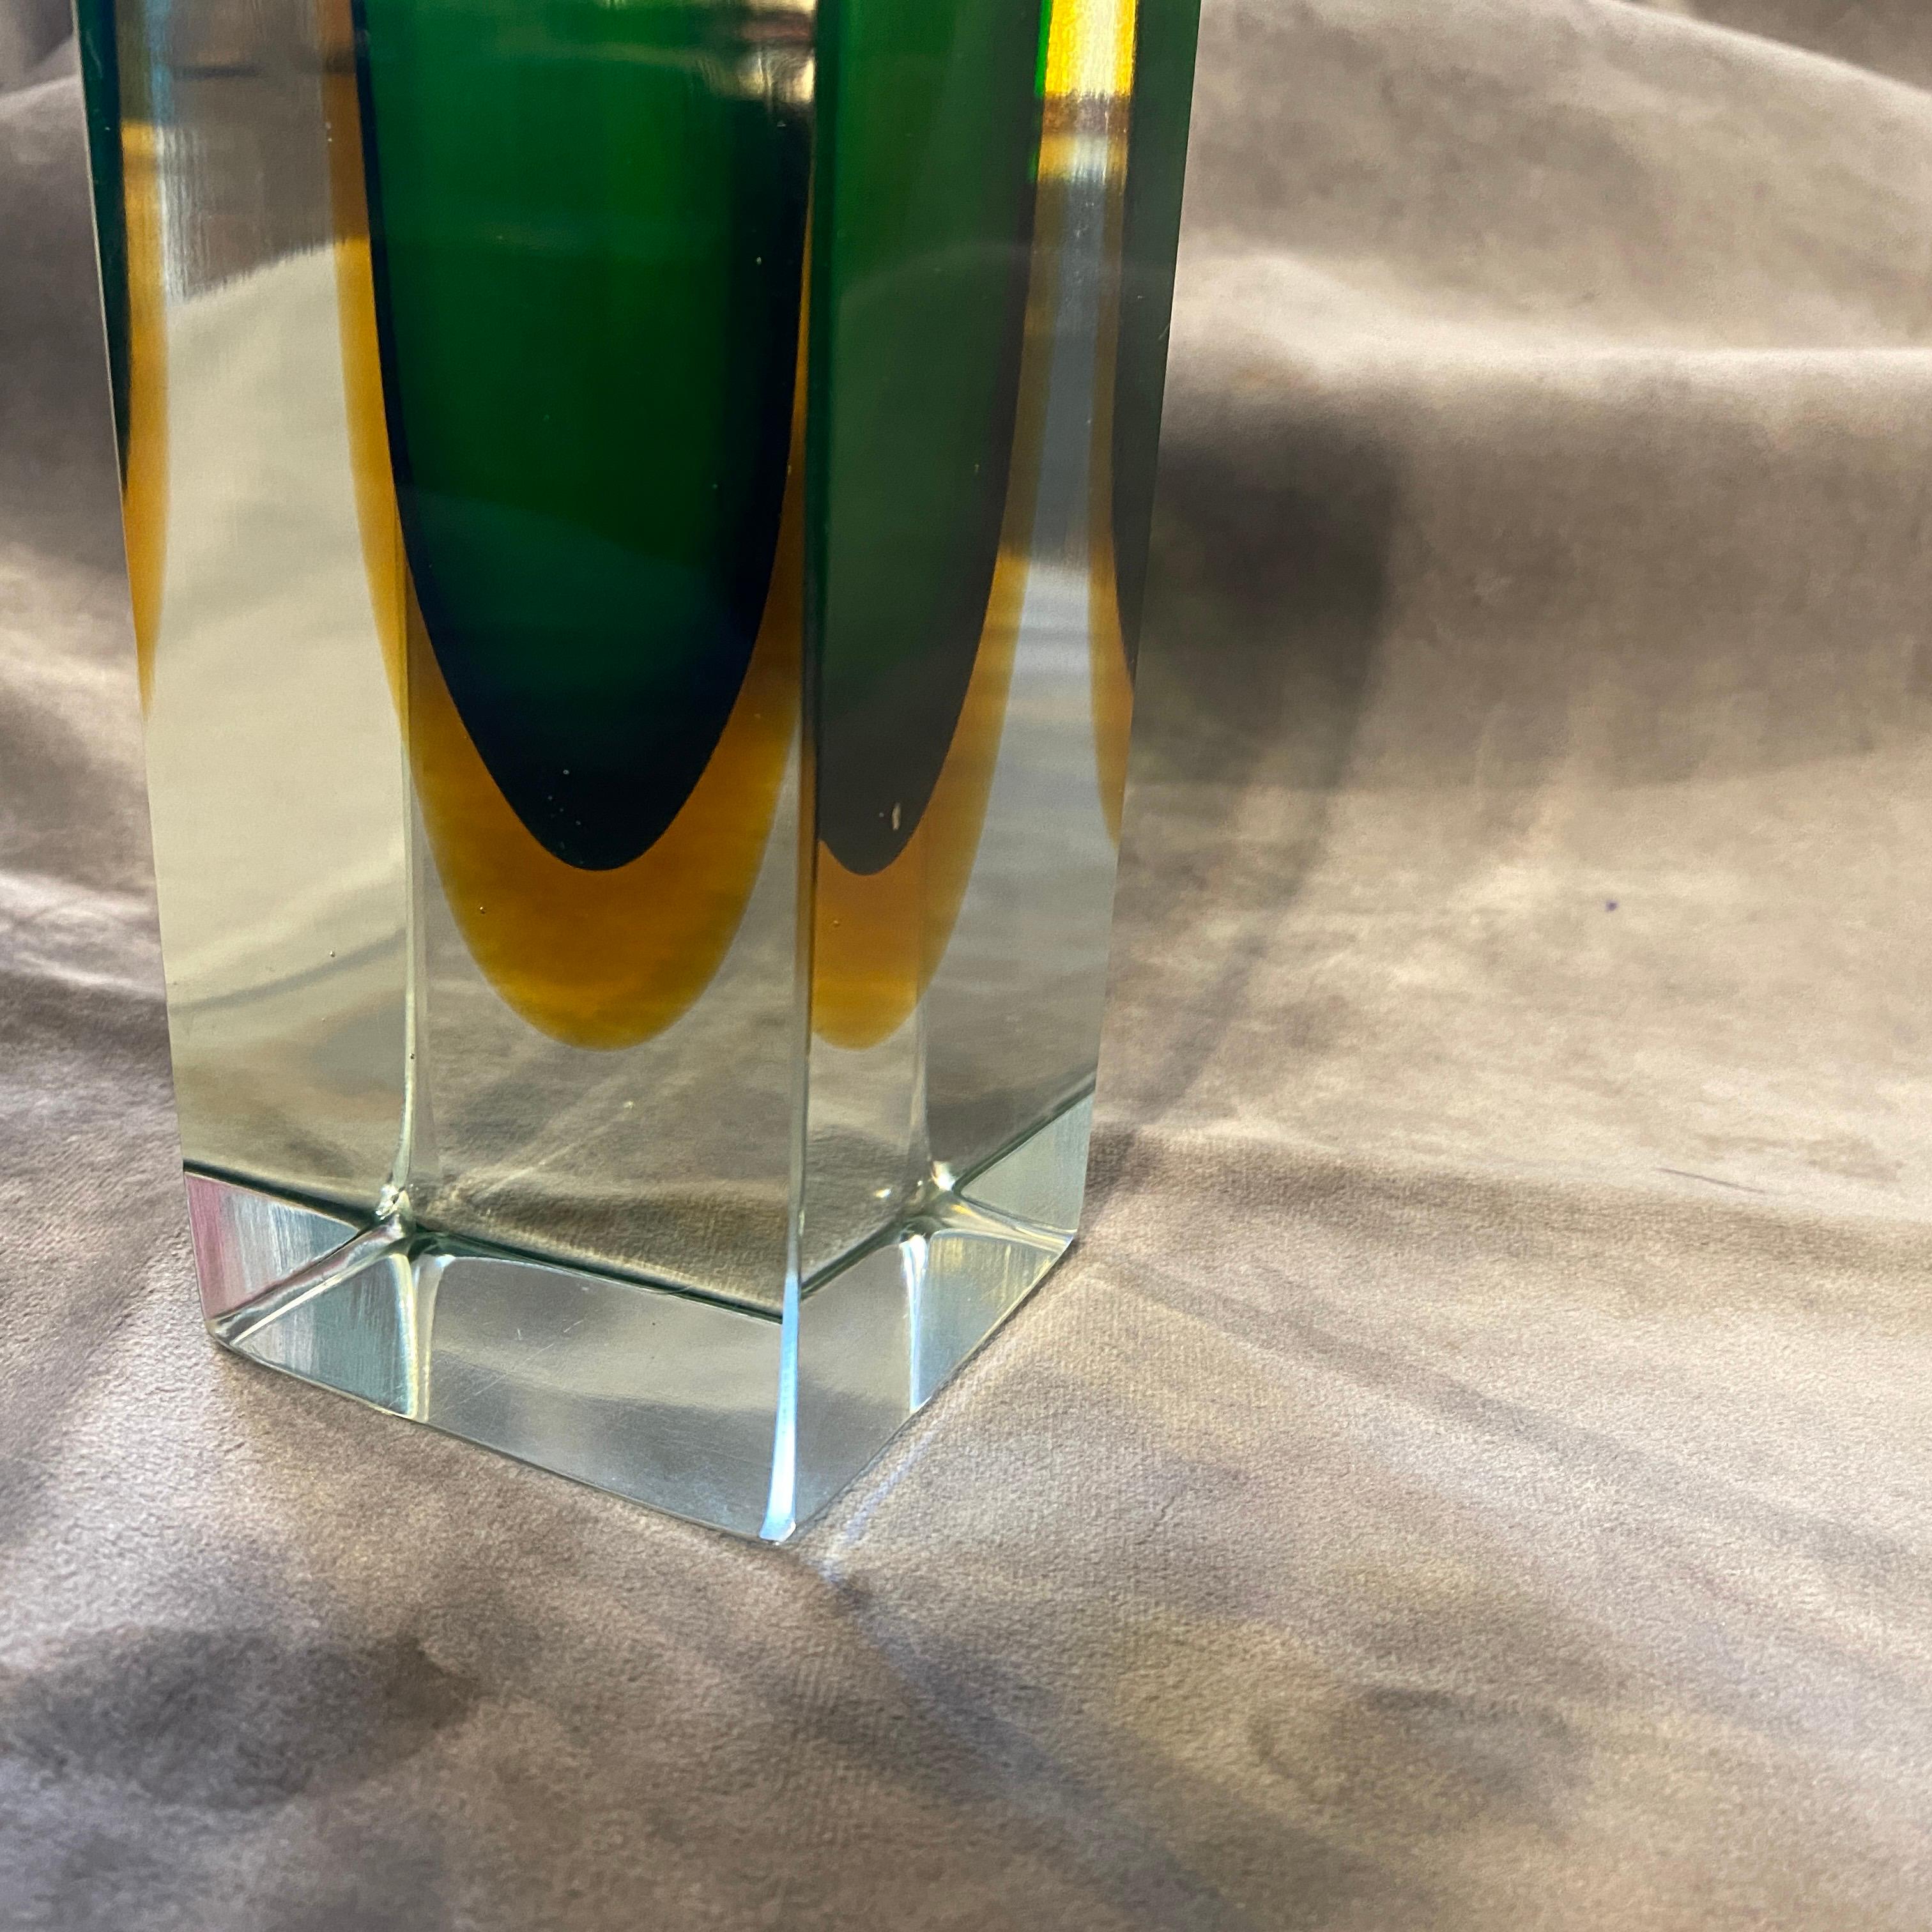 Hand-Crafted 1970s Iconic Green and Yellow Sommerso Murano Glass Vase by Mandruzzato